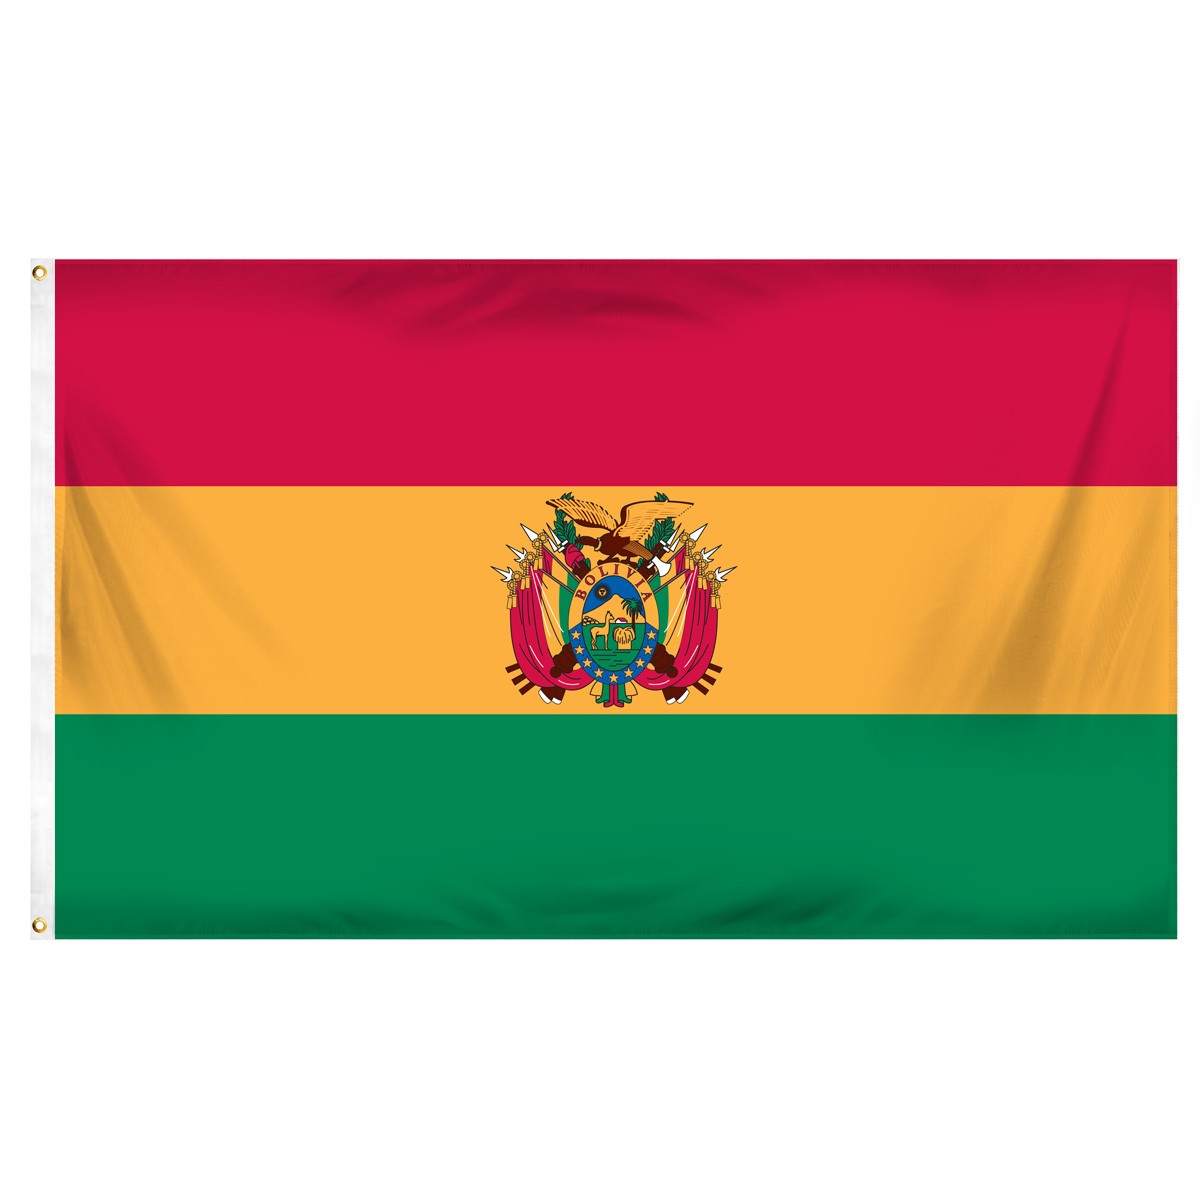 Bolivia Building Pennants and Flags